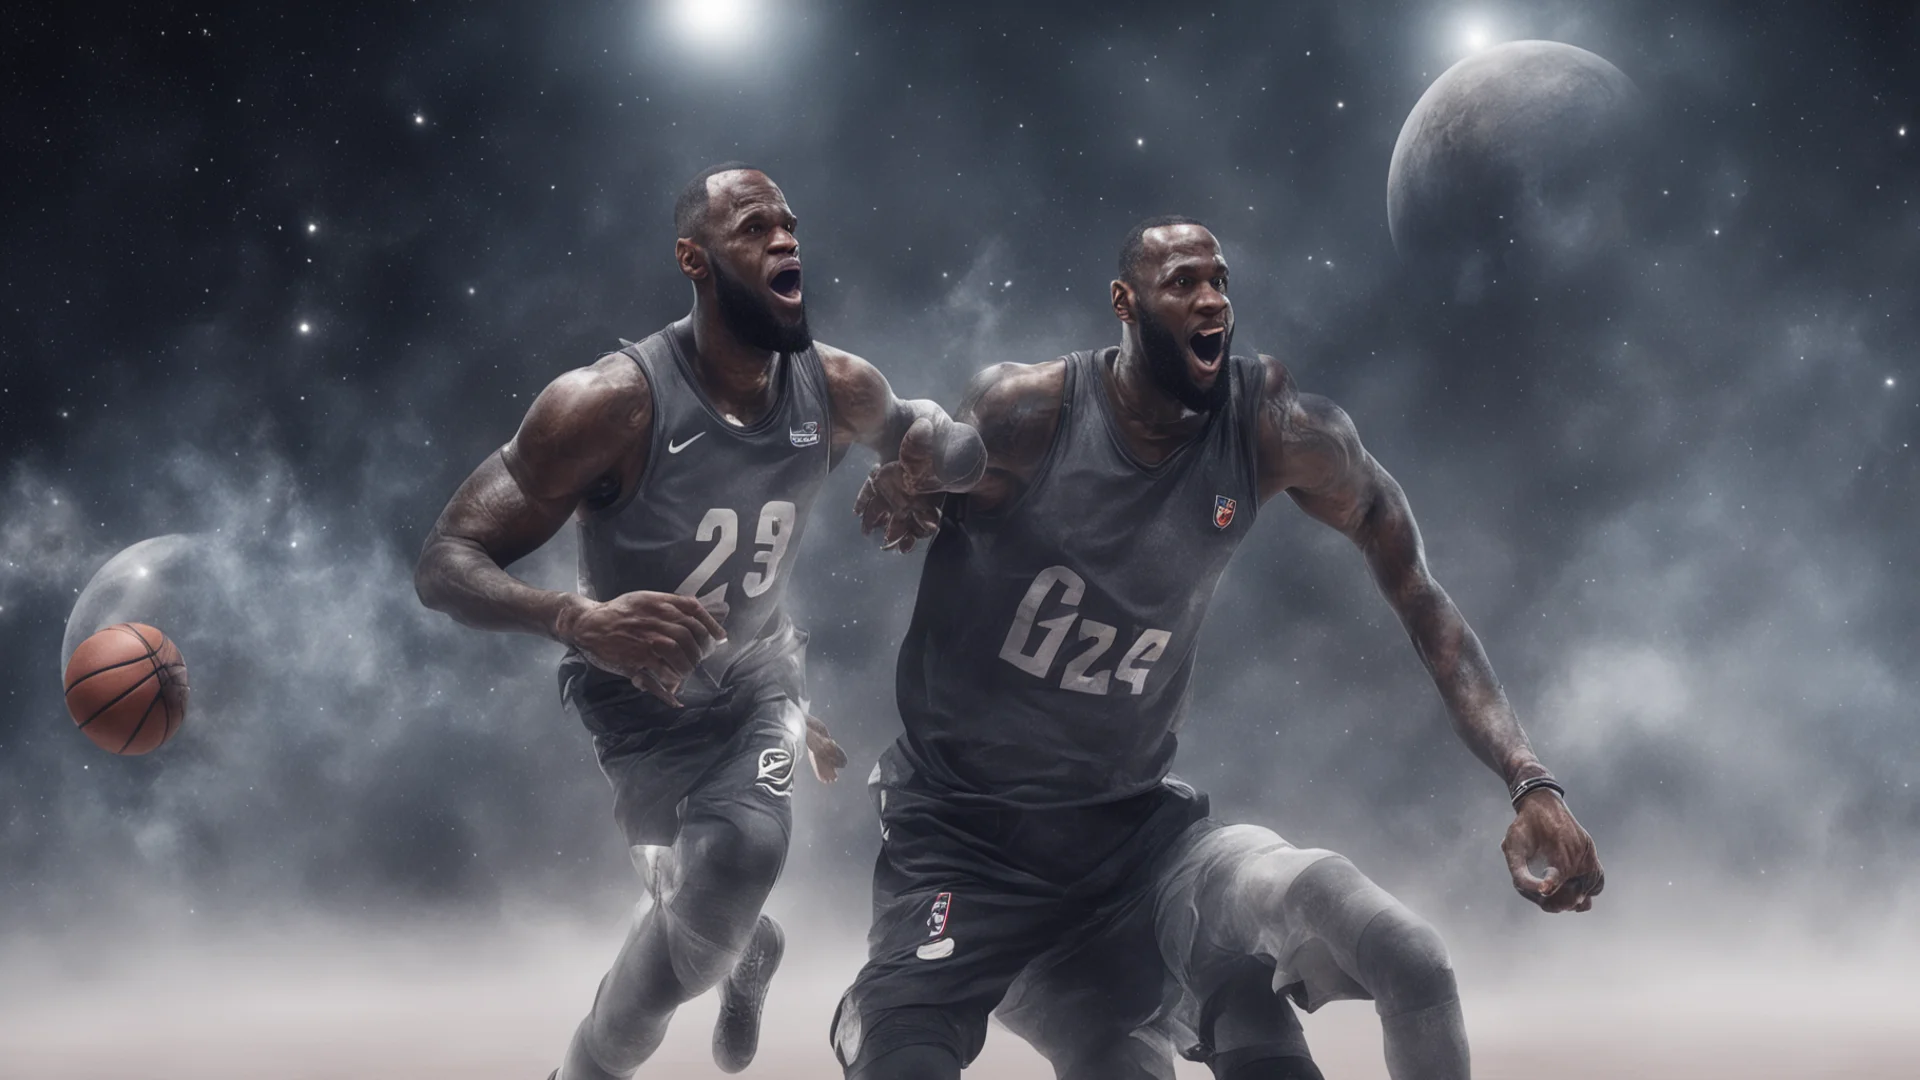 ailebron james into the space playing basketball with aliens  amazing awesome portrait 2 wide